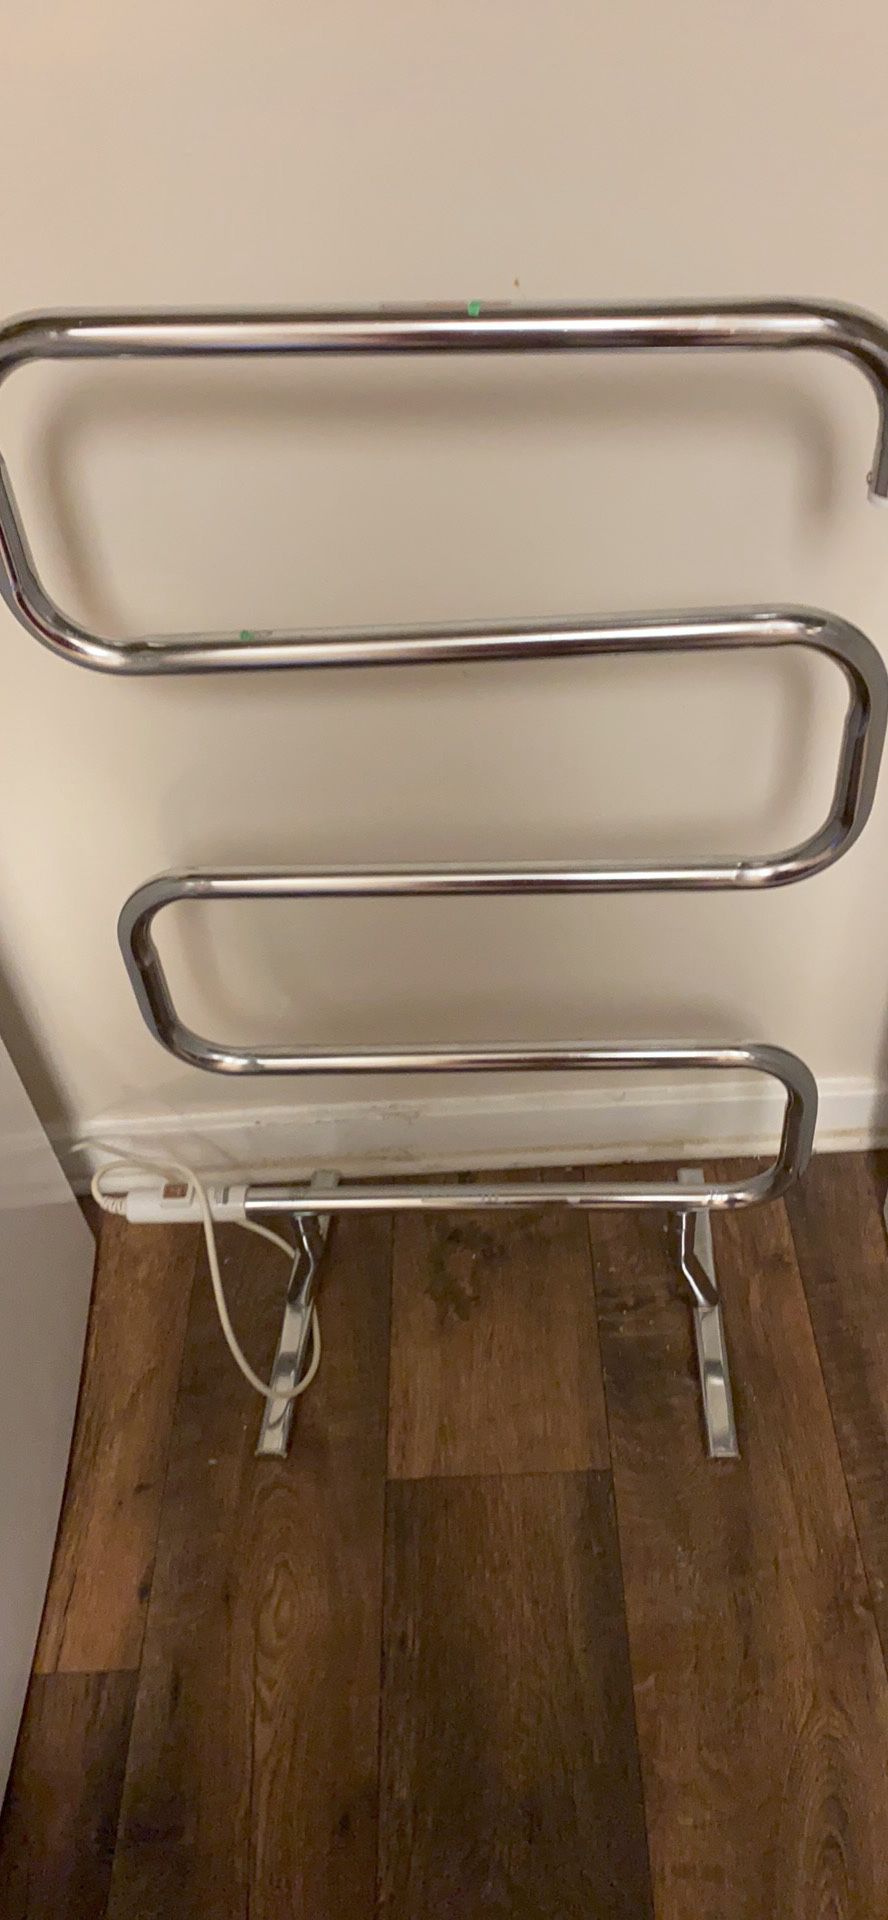 Dryer rack for clothes